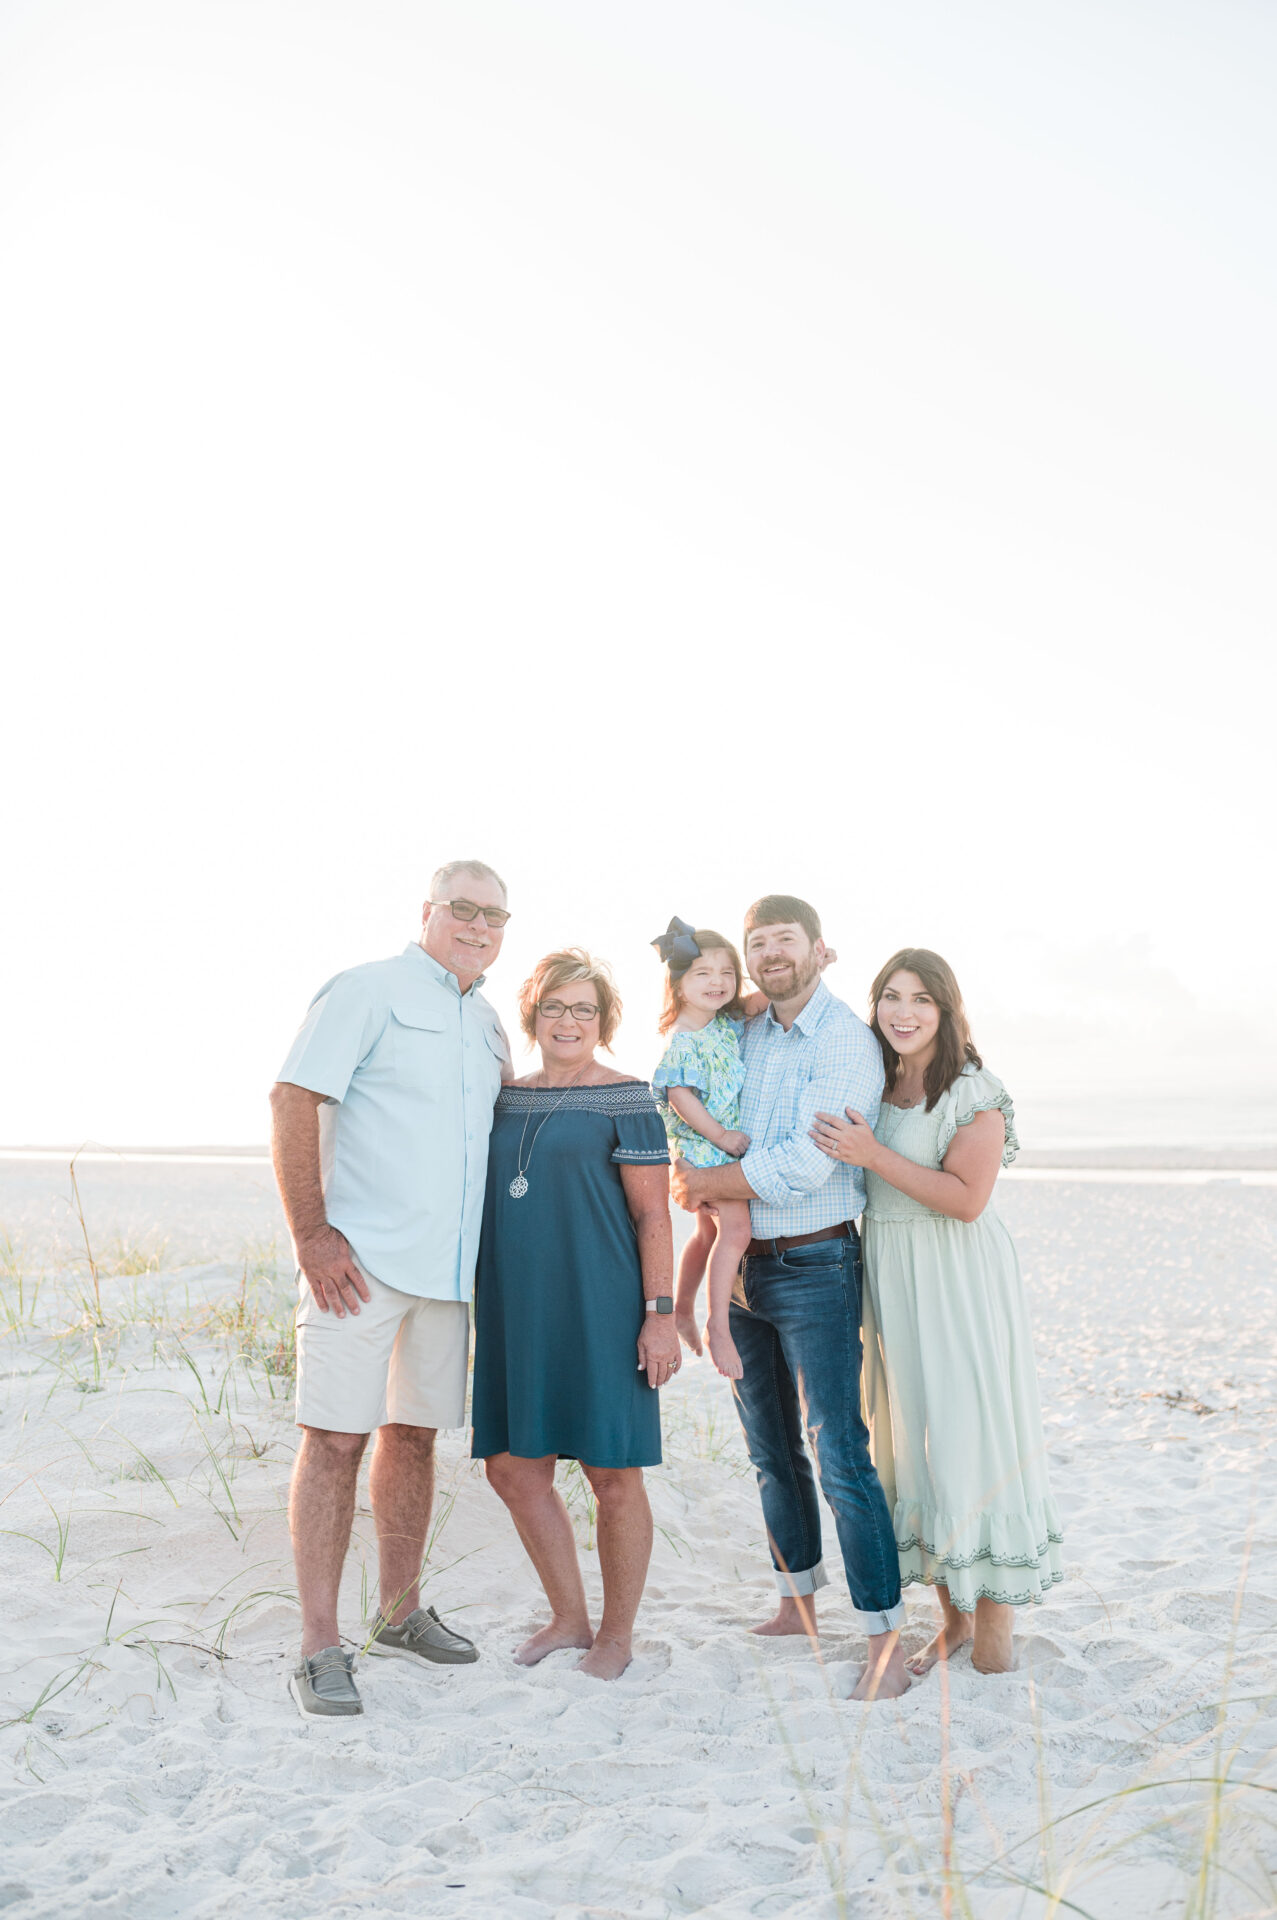 Multigenerational Travel Tips. Family of 5, three generations posed on the beach in Gulf Shores, Alabama